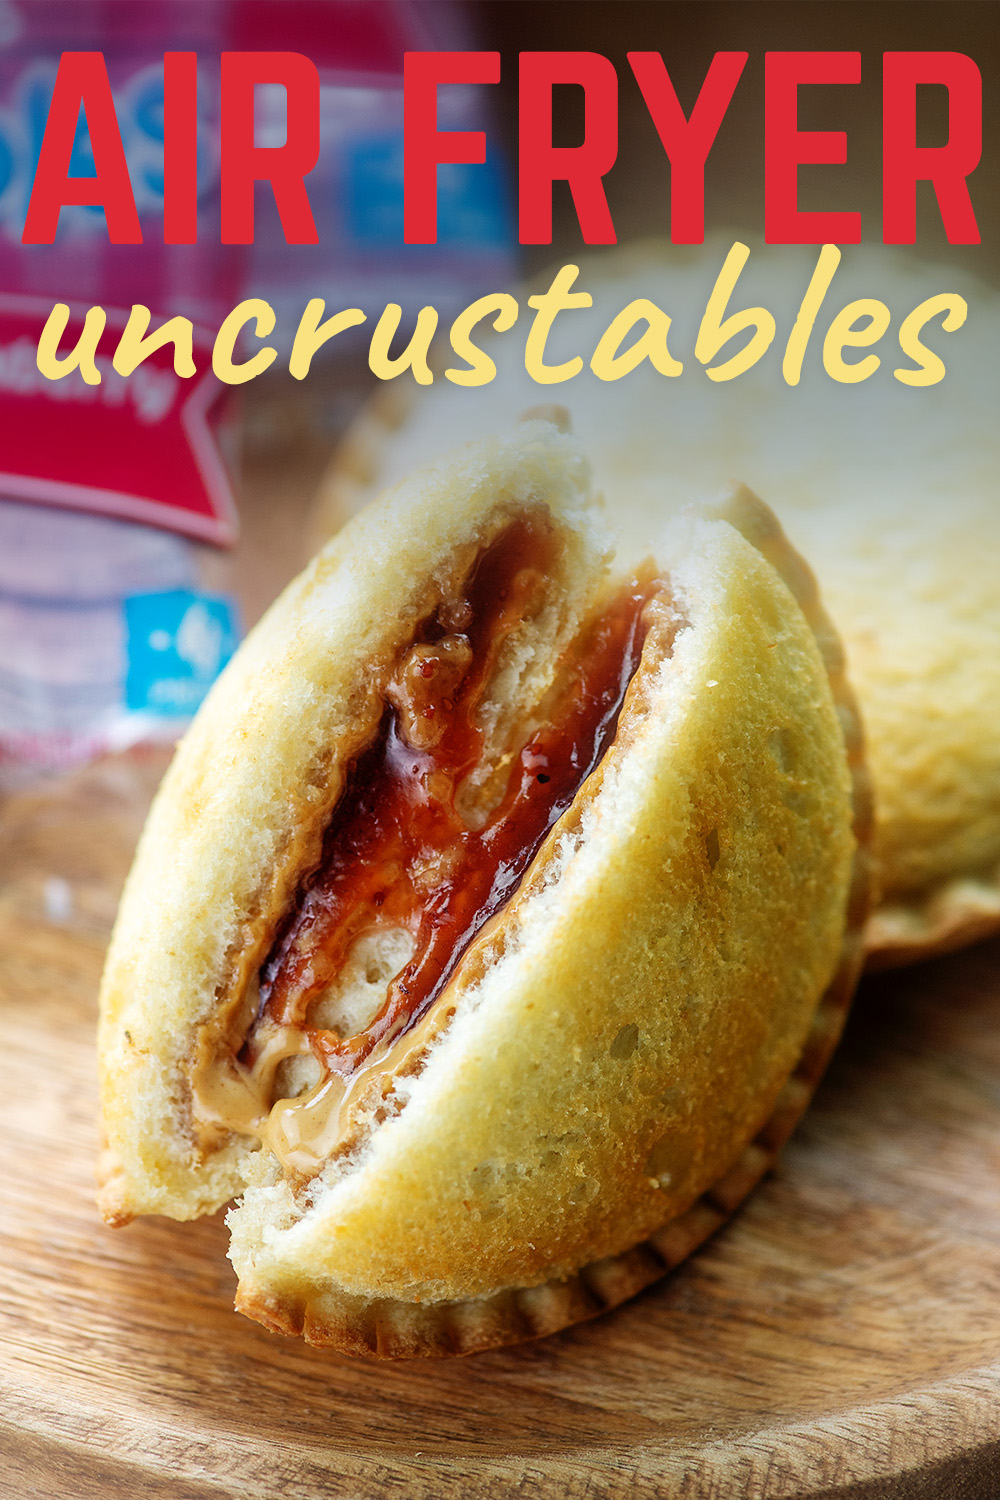 The melted peanut butter and warm jelly inside these air fryer uncrustables makes this lunch so good it is almost dessert!